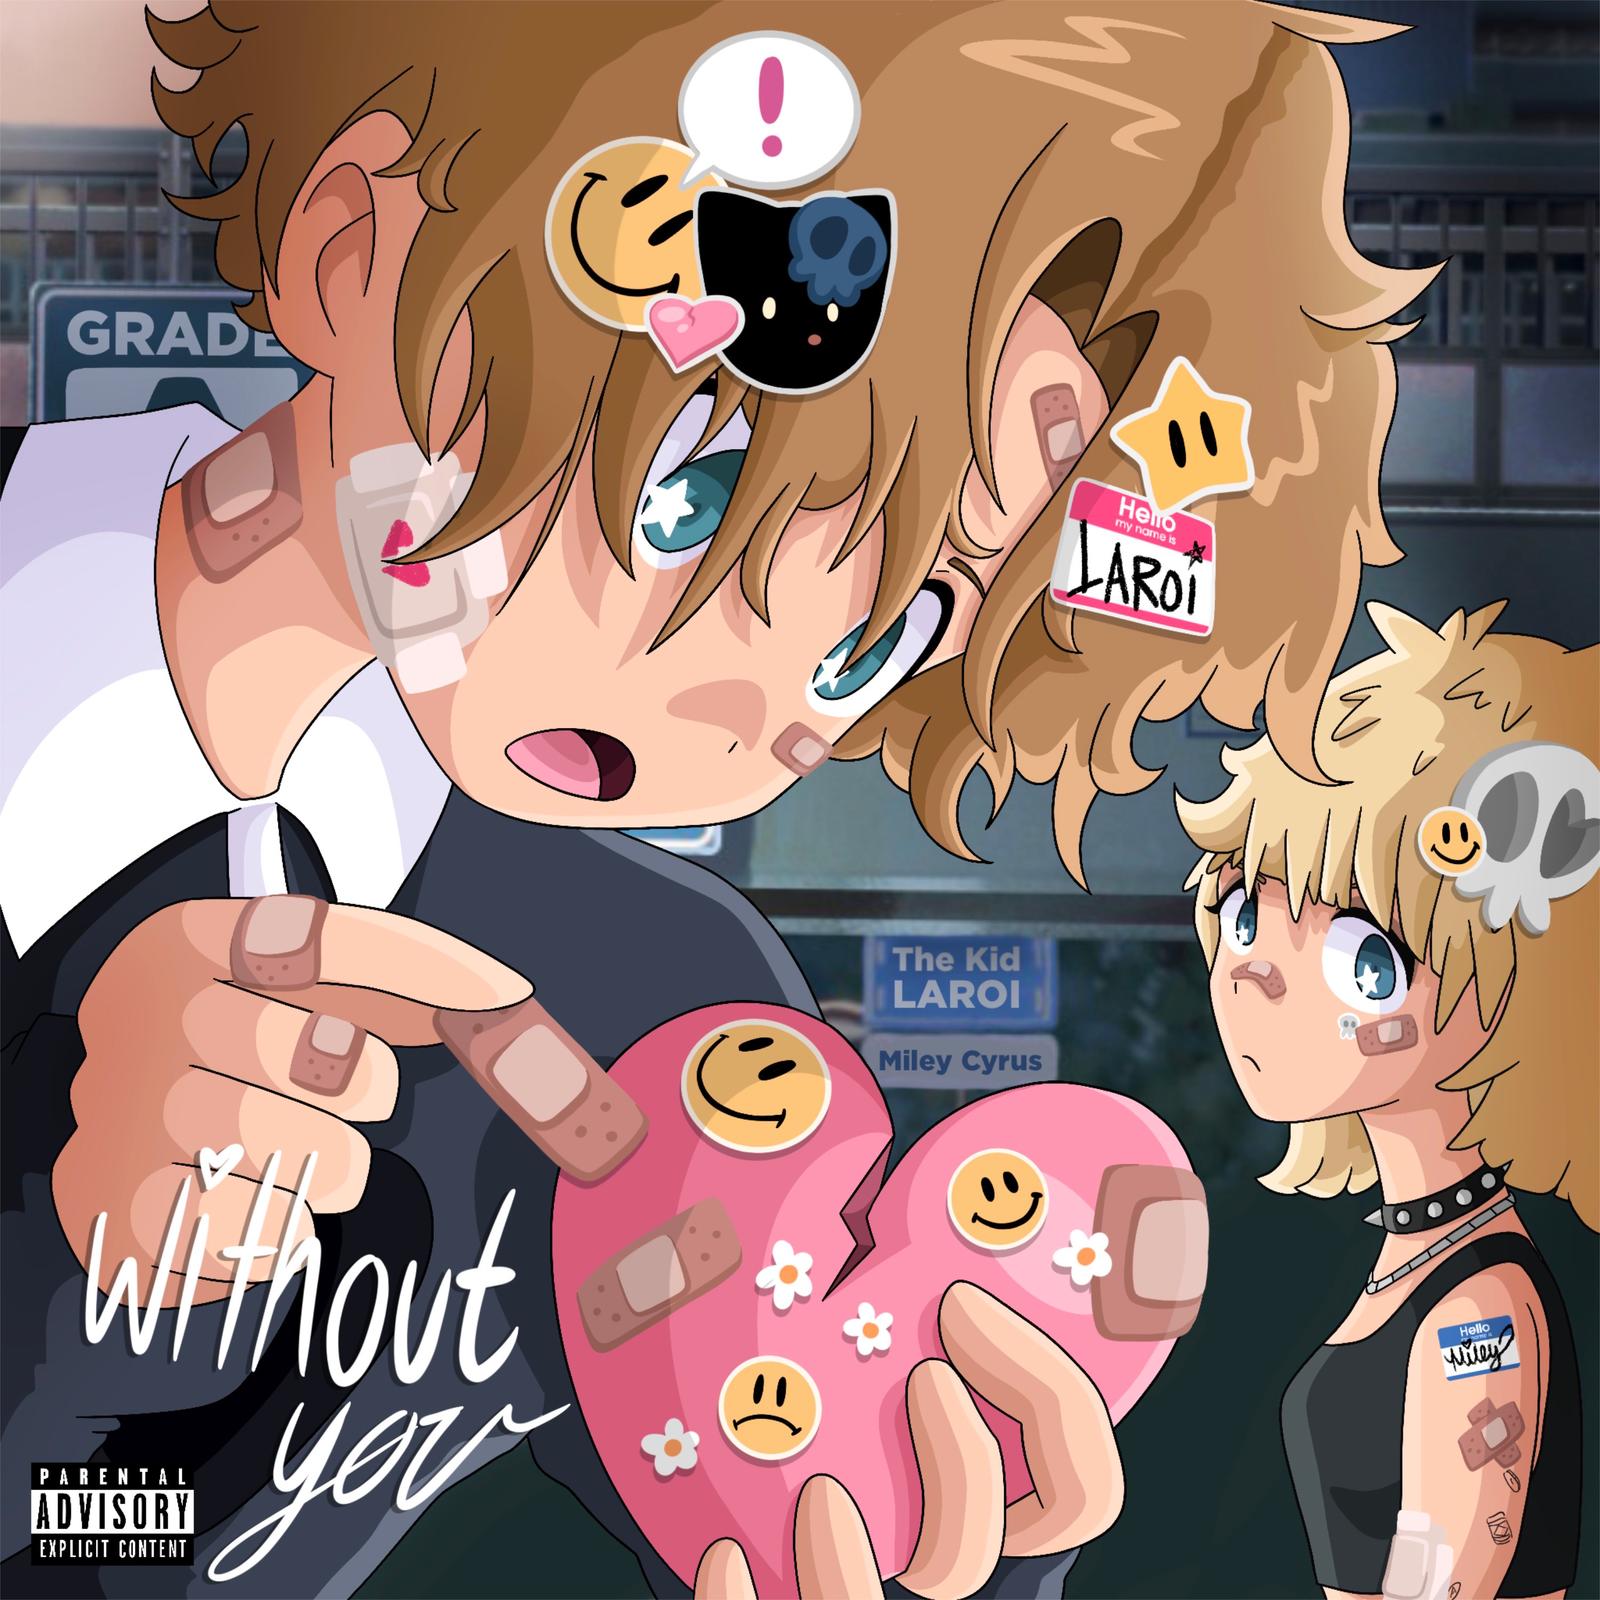 The Kid LAROI & Miley Cyrus - WITHOUT YOU (Remix)